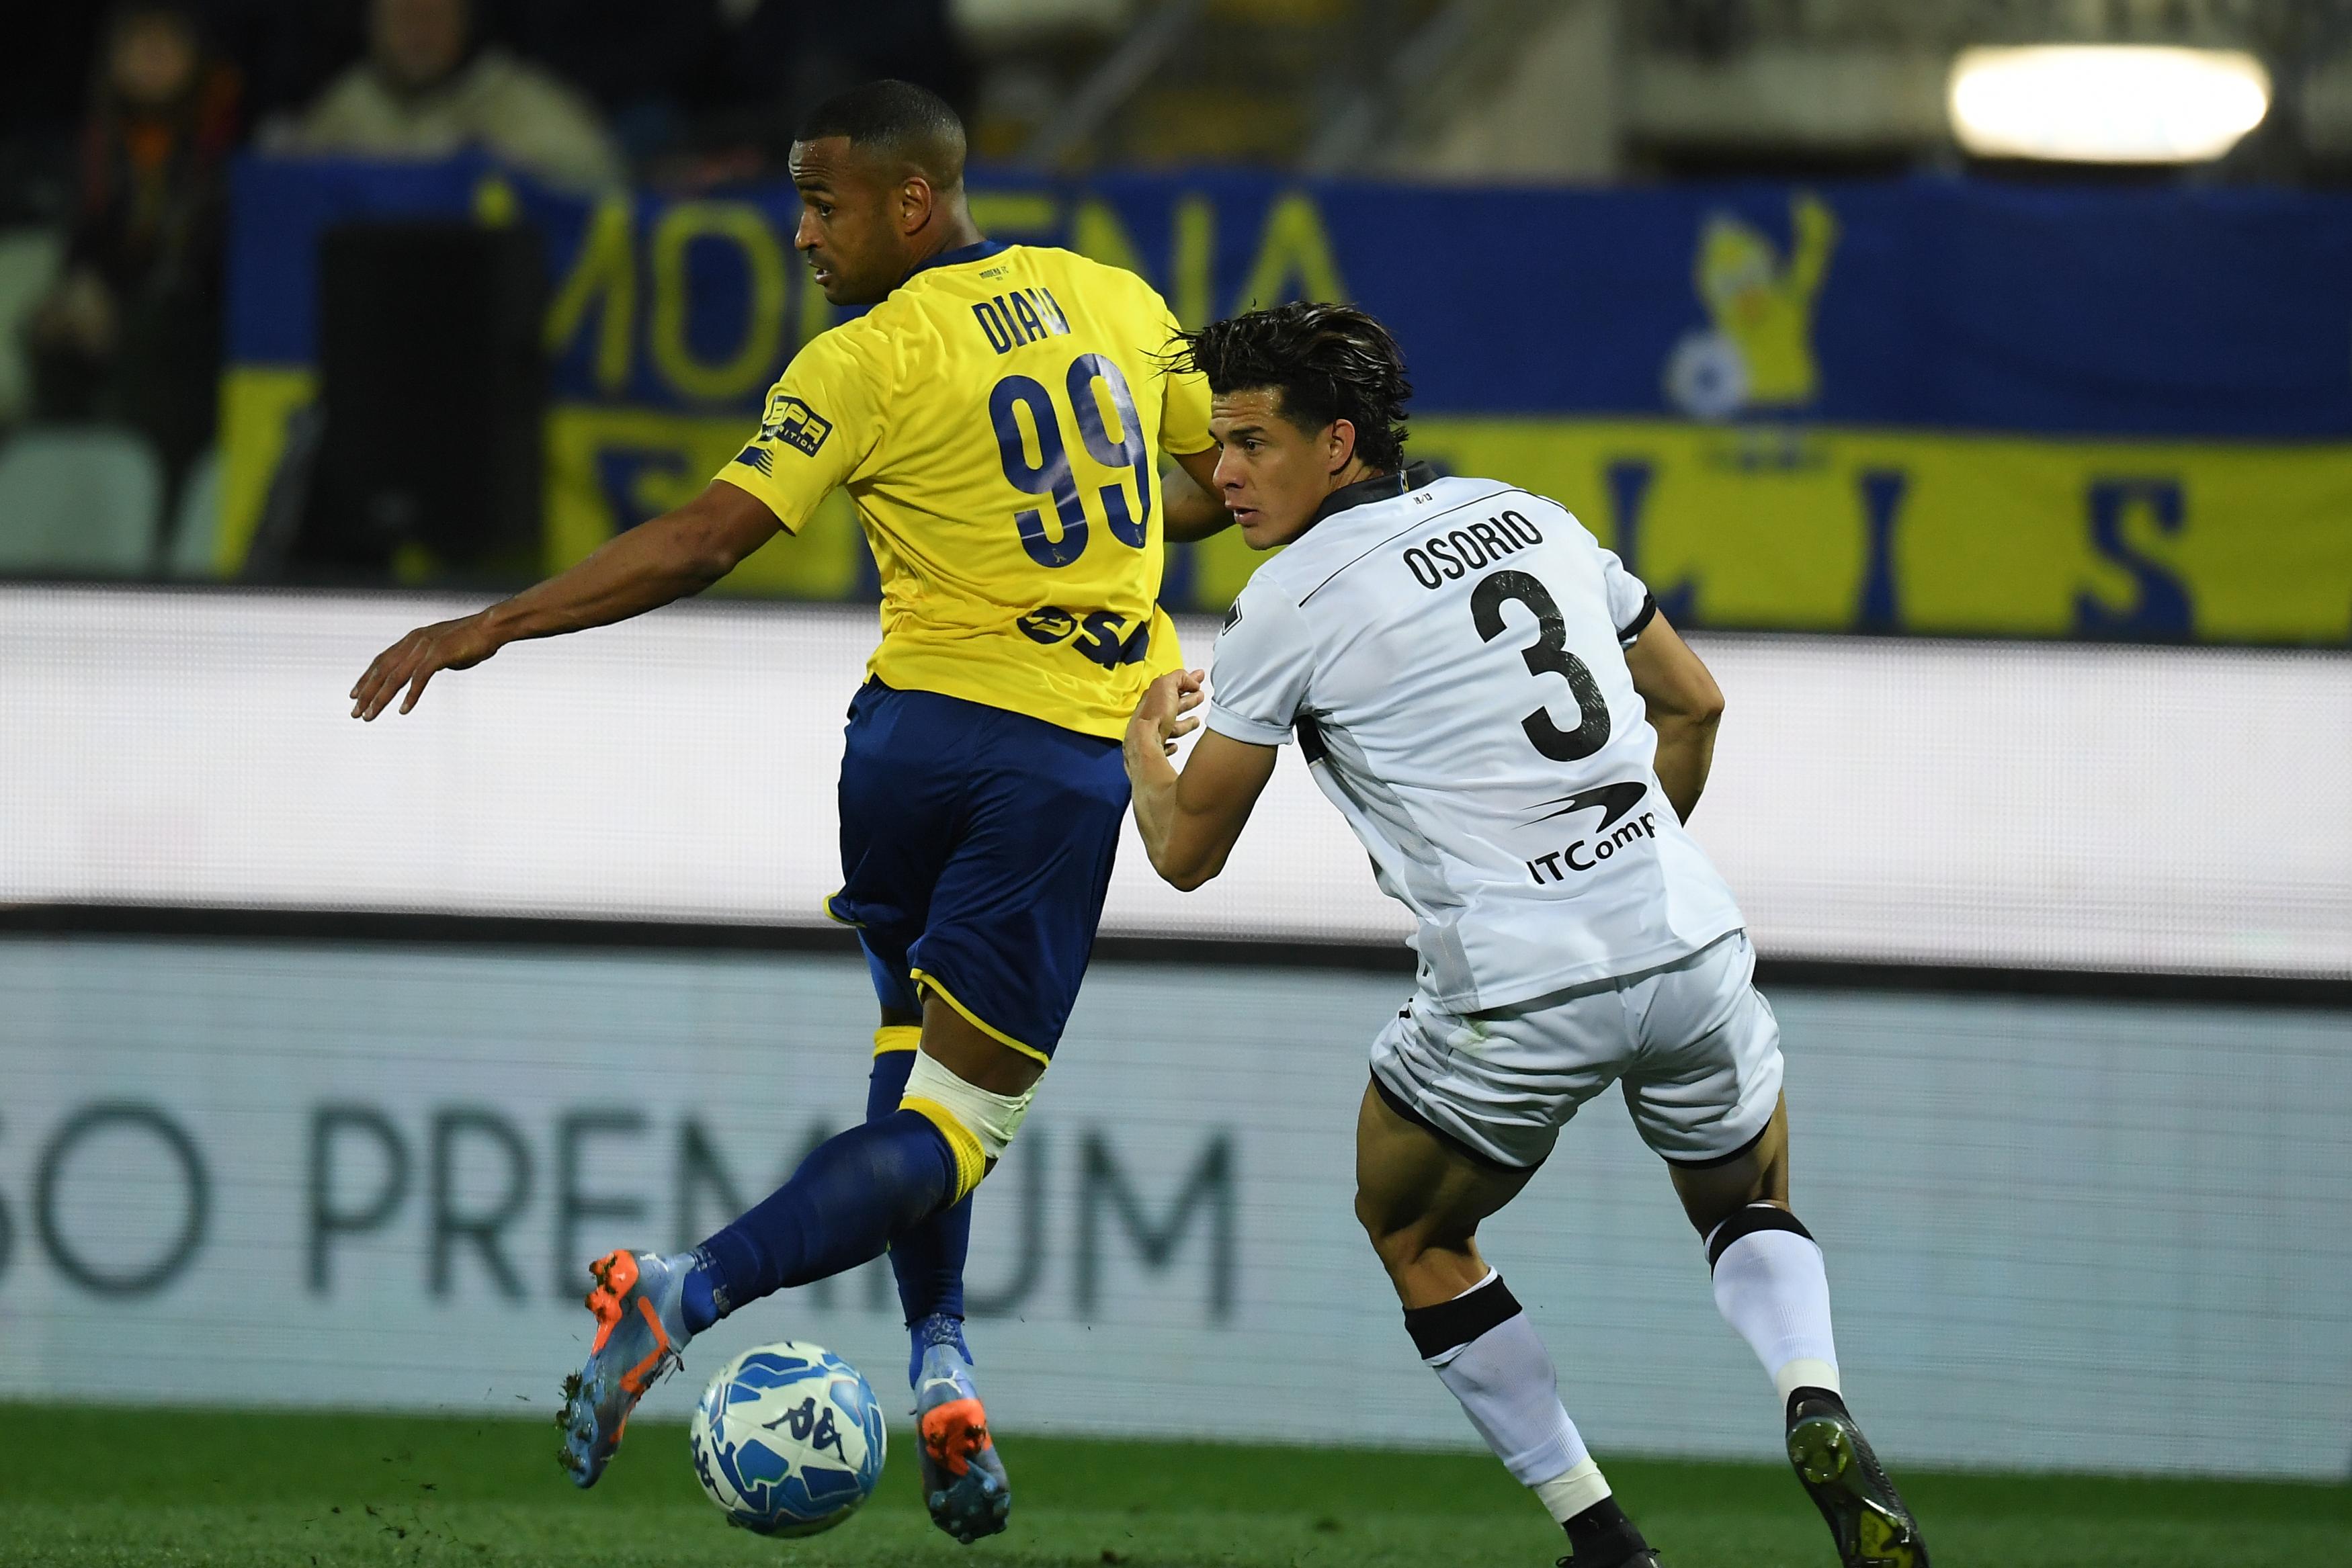 Modena Football League, equal in the derby with Parma